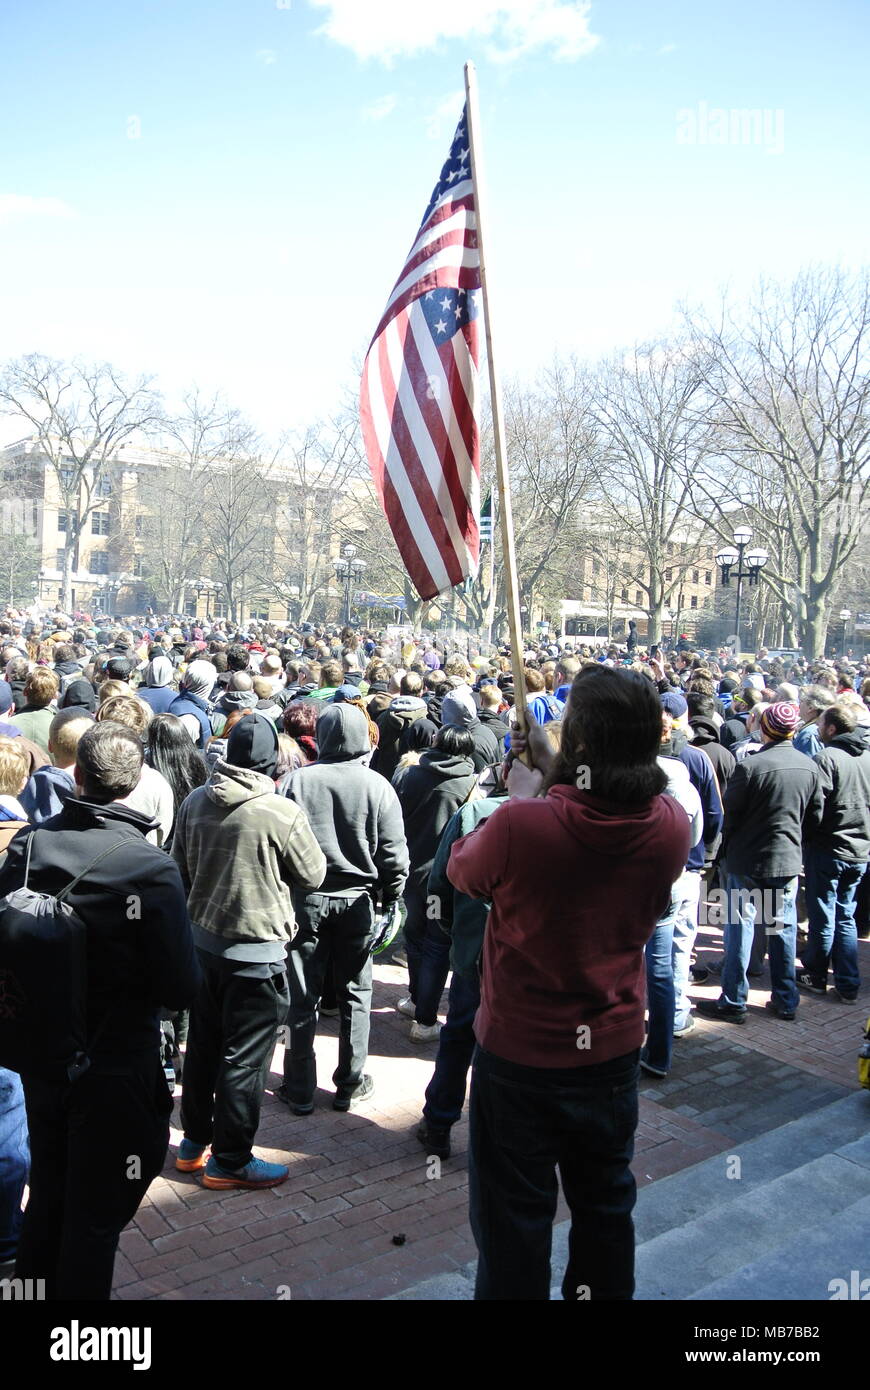 Ann Arbor, Michigan, USA.  7 April 2018. Crowds during the National Anthem at the 47th Annual Hash Bash event.   Credit, Jeffrey Wickett/Alamy Live News. Stock Photo